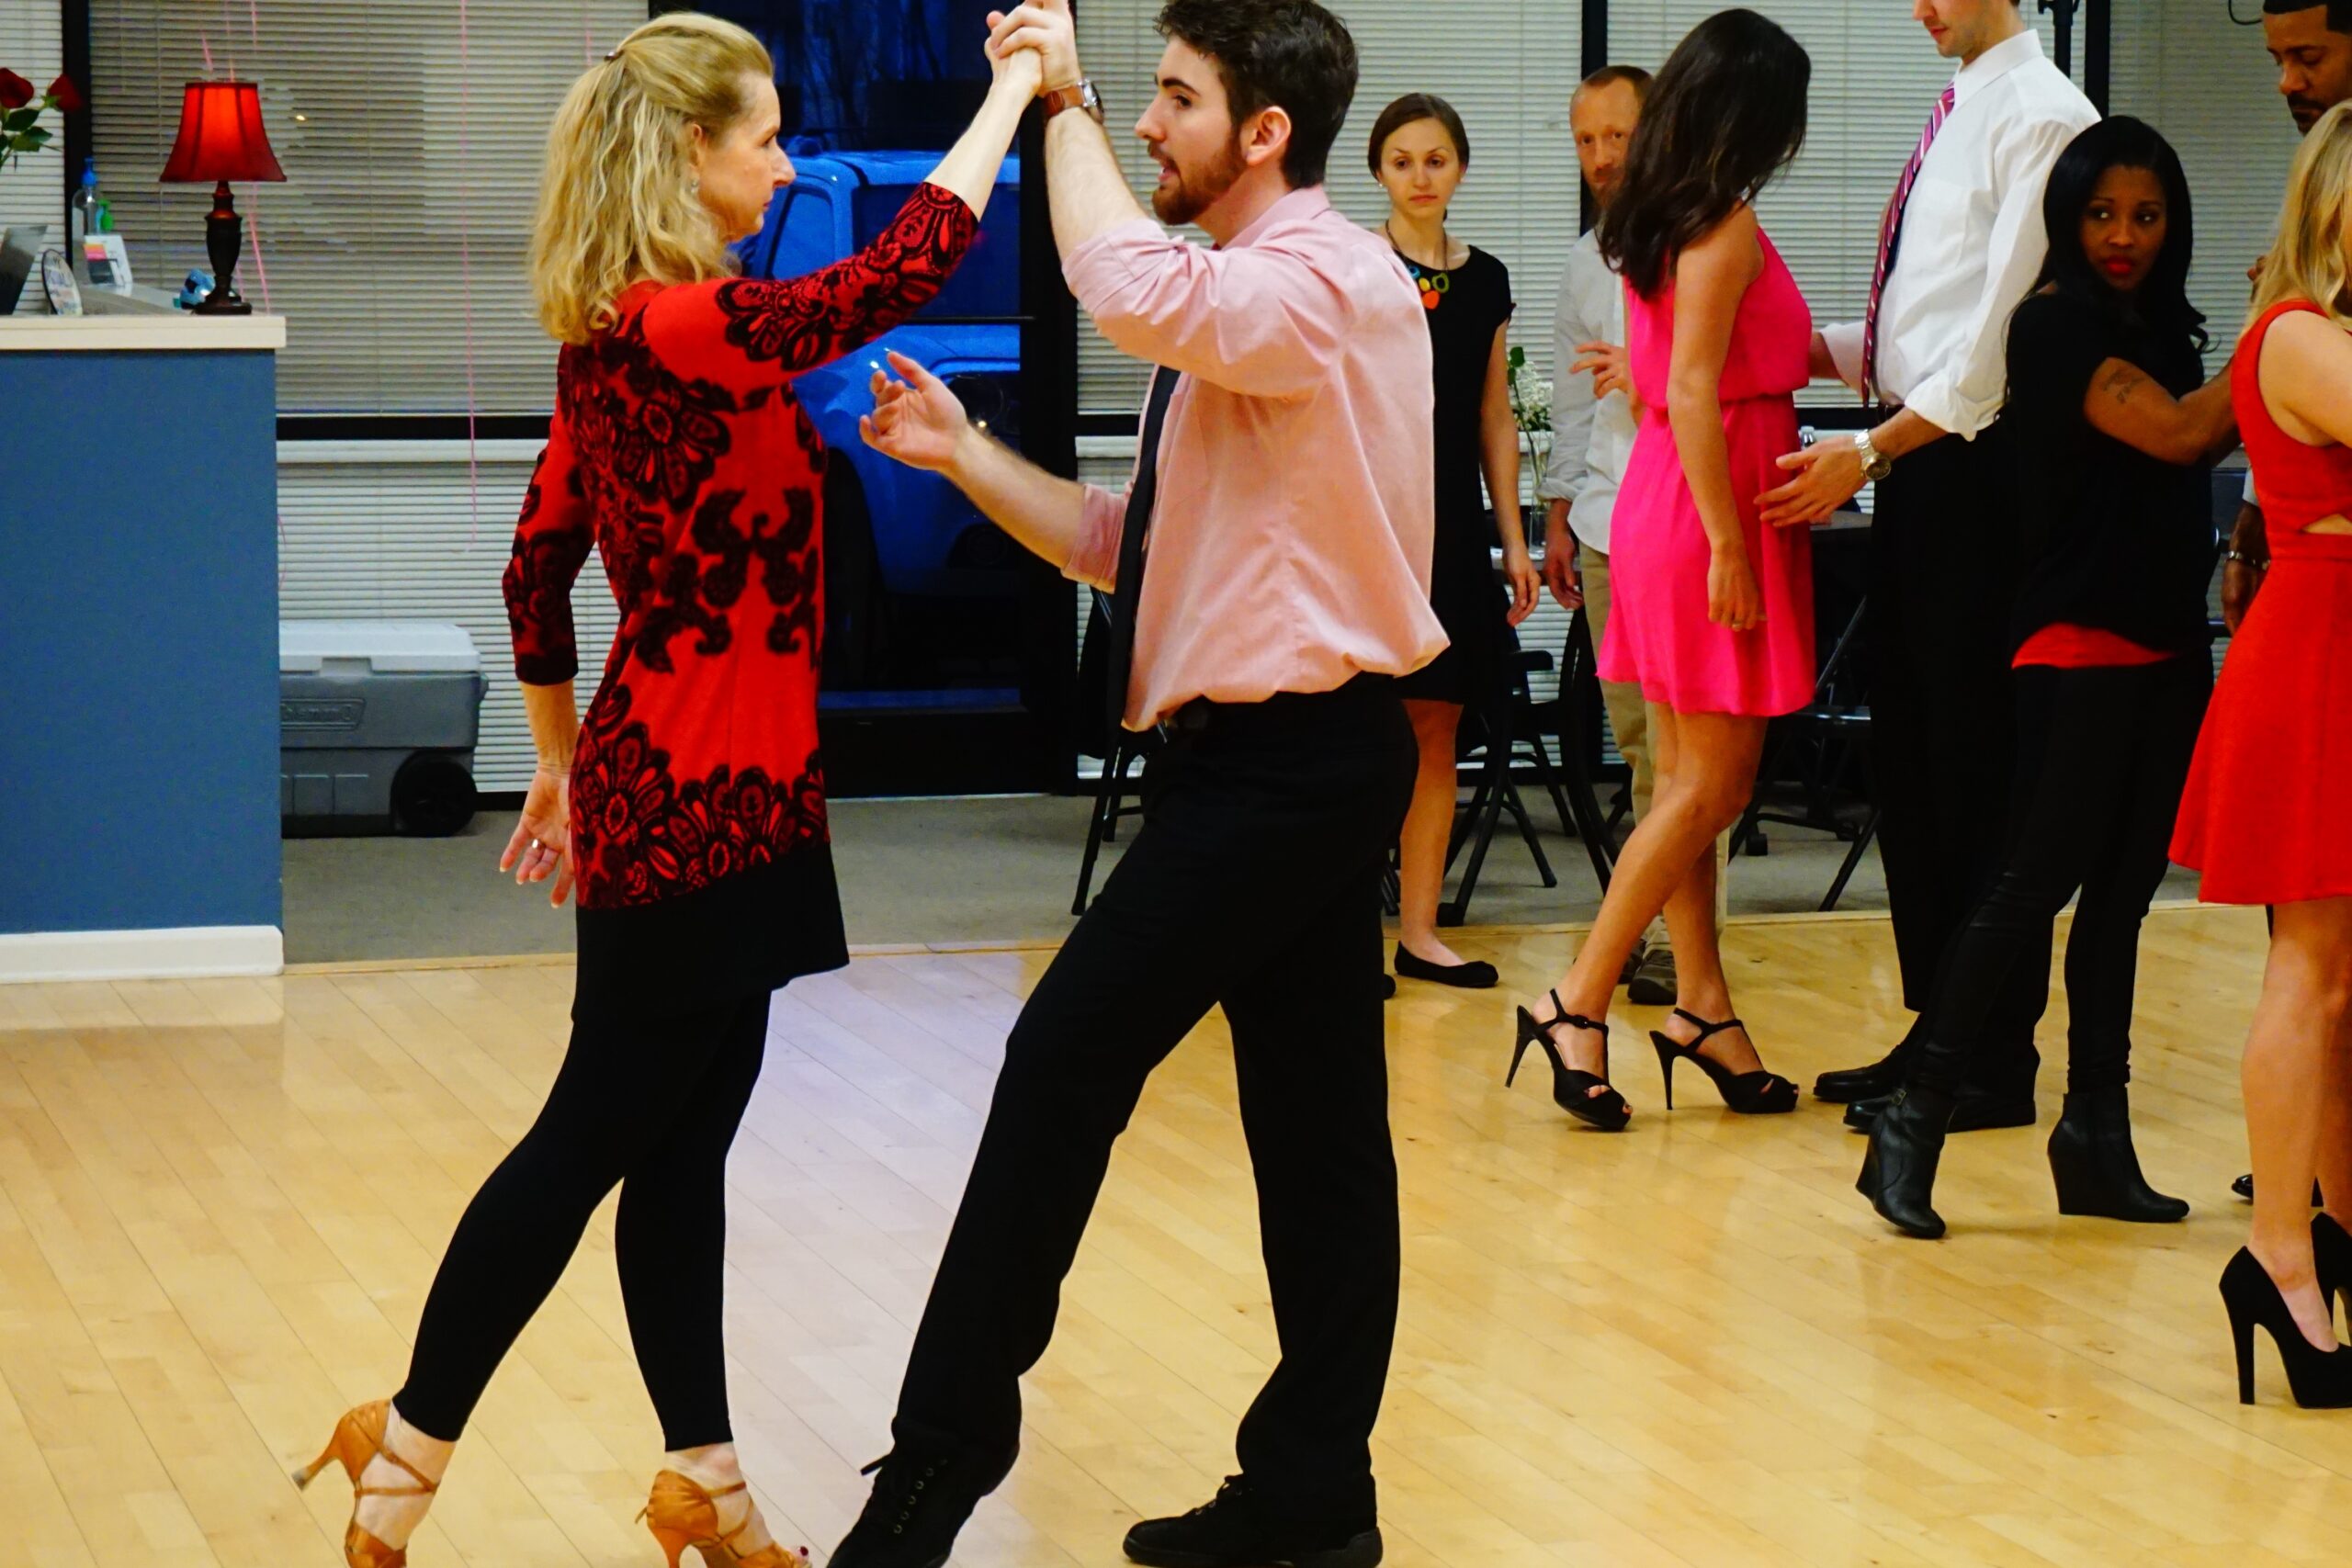 A ballroom dancing company offers ballroom dance instruction in a well-equipped facility. It may prepare teams for national or regional contests as well as provide dancing classes to people who just wish to learn how to dance. A ballroom dancing instruction company may be affiliated with a leisure facility or a club, and it may provide courses for both interested dancers and instructors.